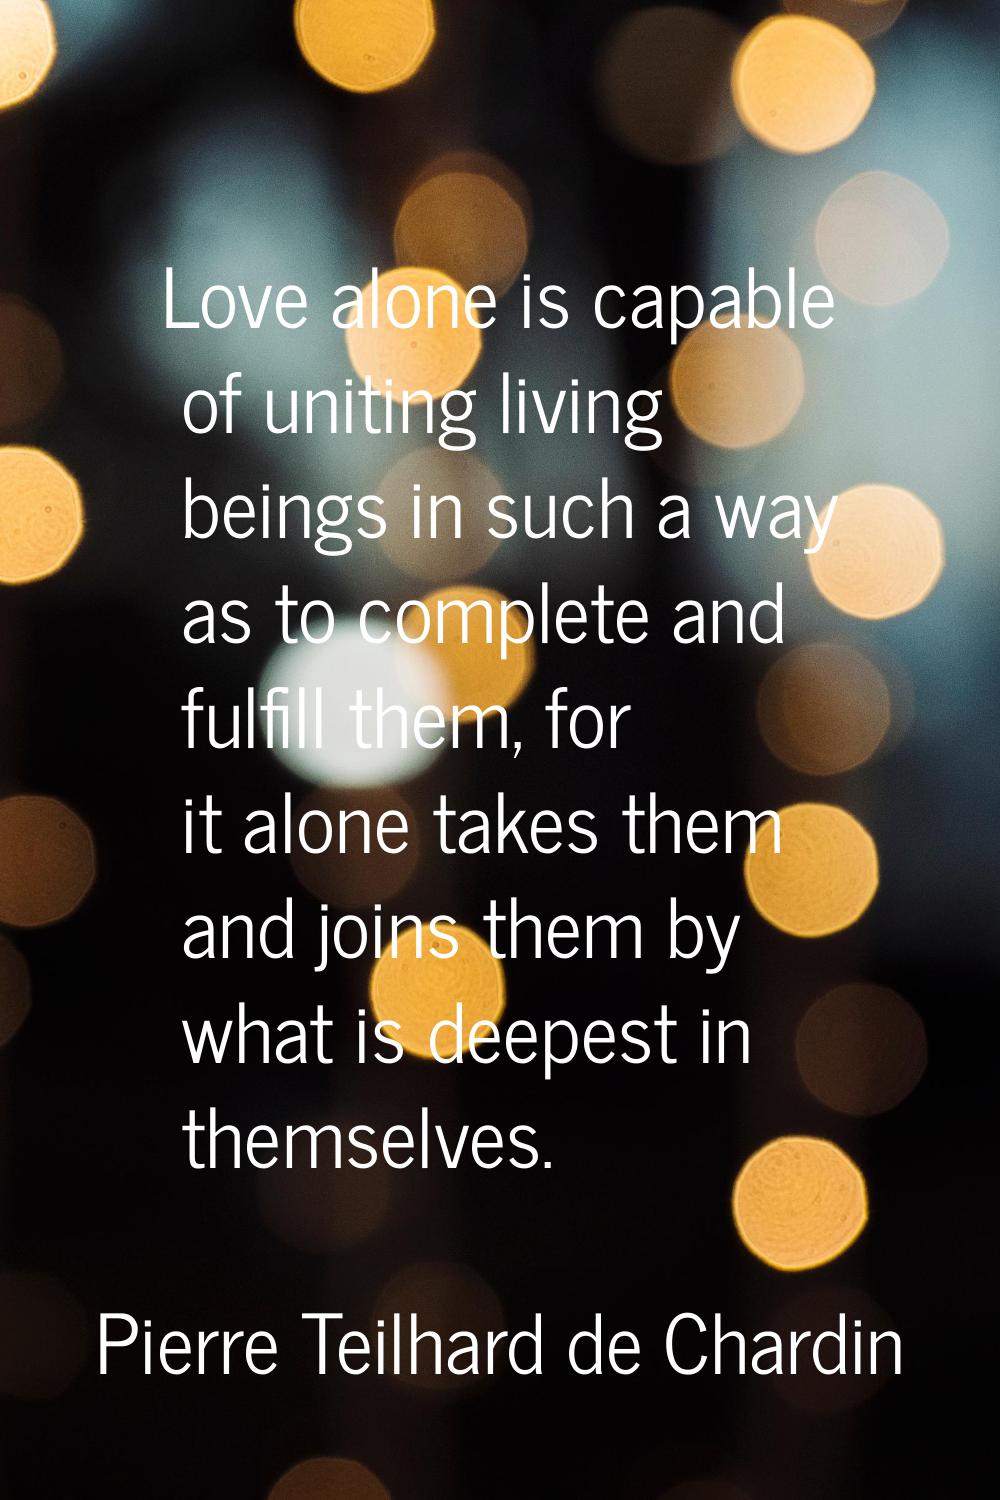 Love alone is capable of uniting living beings in such a way as to complete and fulfill them, for i